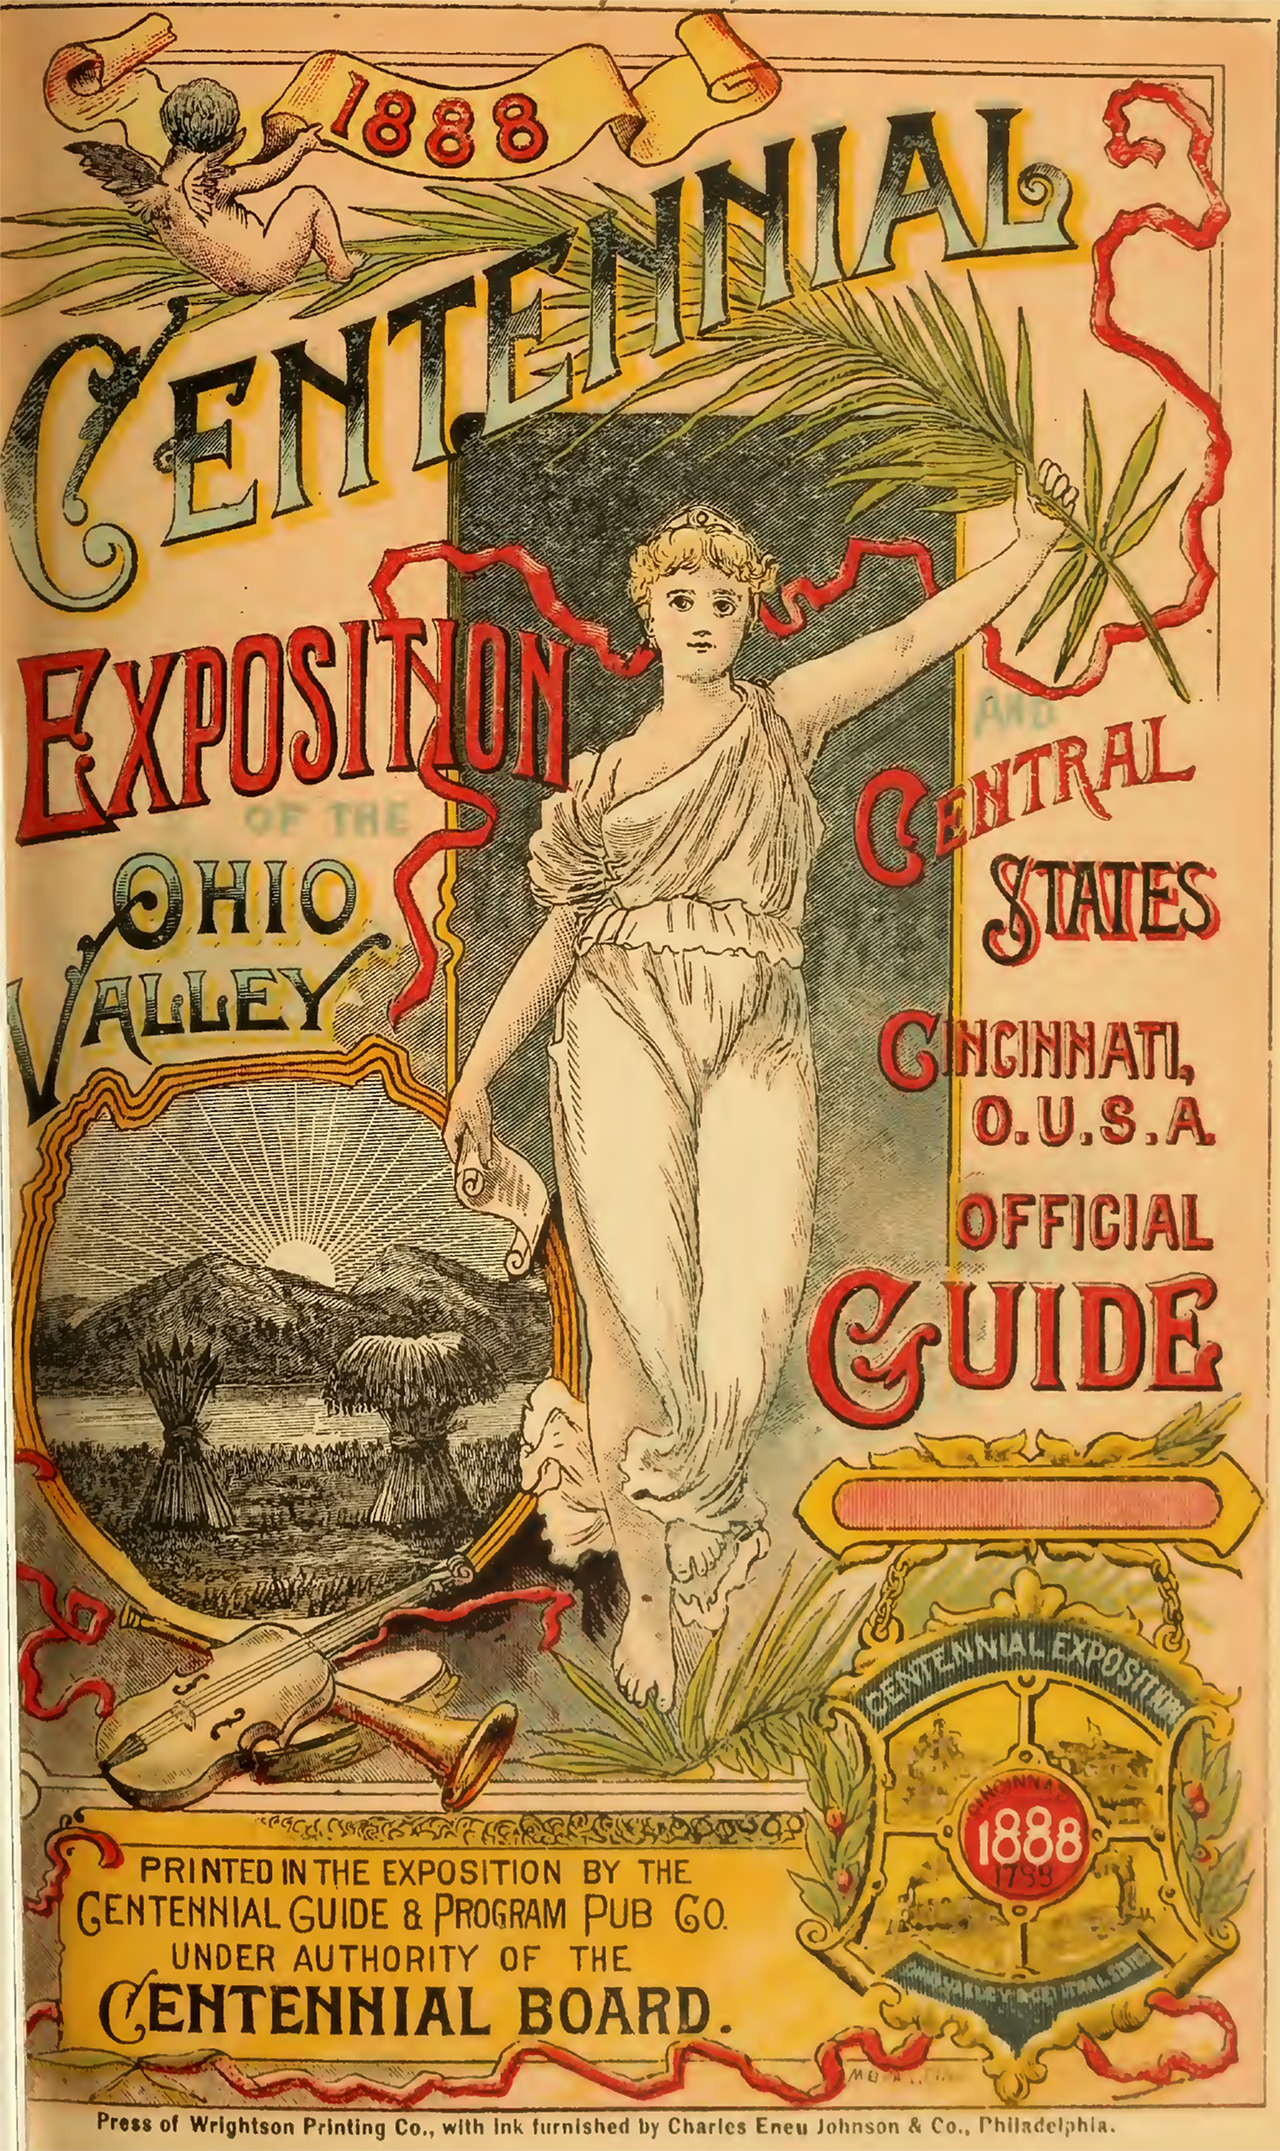 A poster commemorating the Centennial Exposition from the official guide